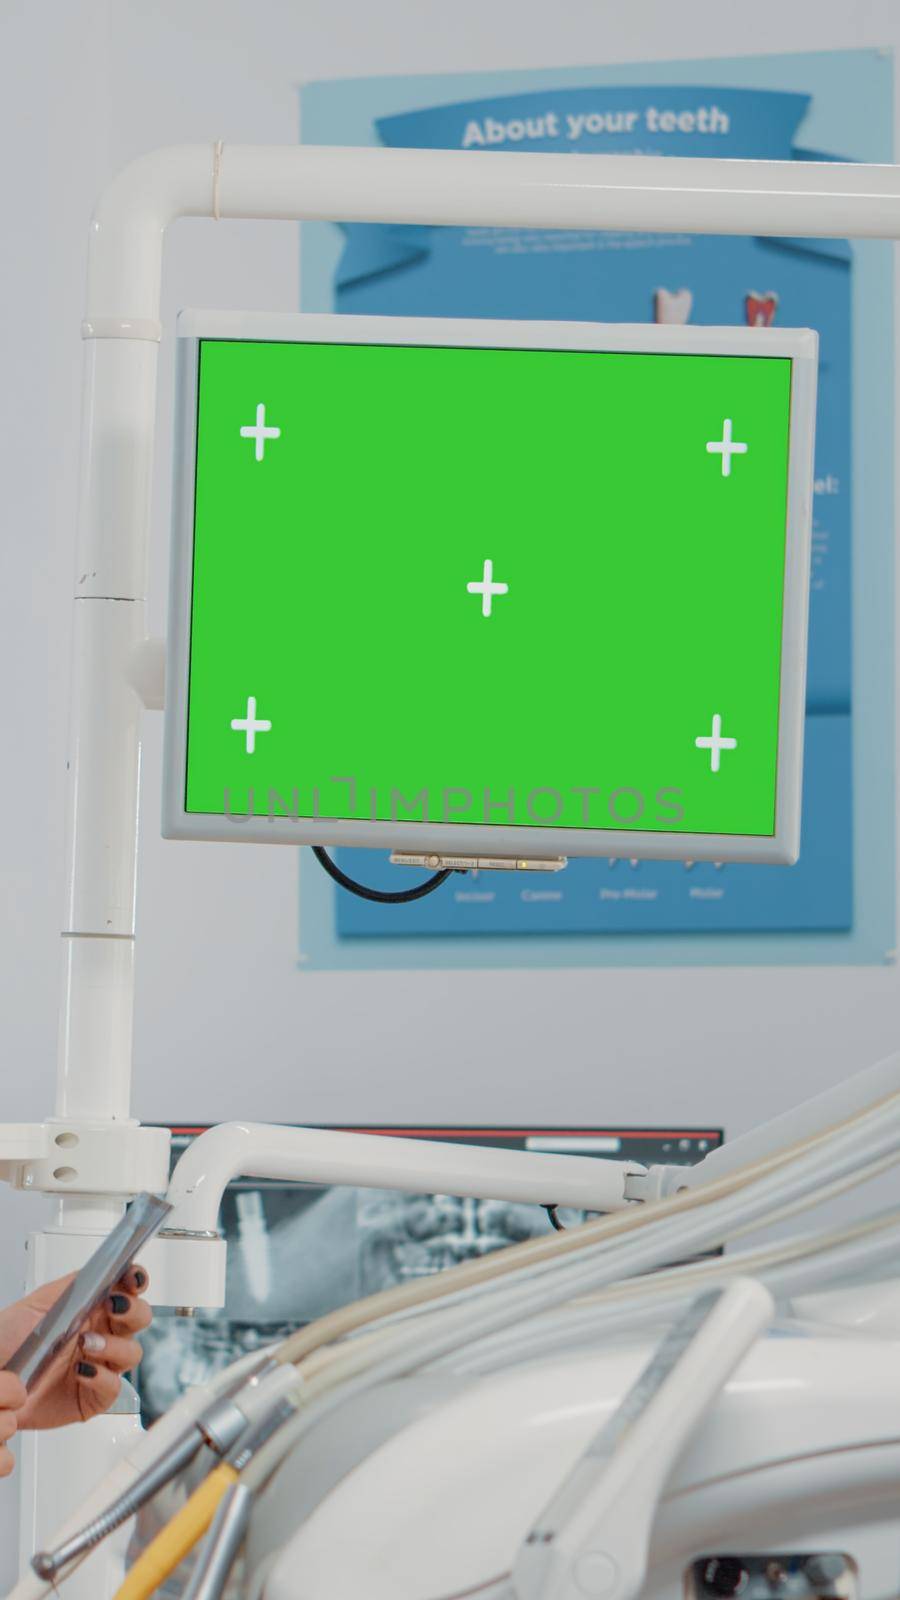 Dentist analyzing horizontal green screen on monitor and radiography of teeth for dental care. Woman using chroma key and mockup template for oral examination and teethcare in cabinet.